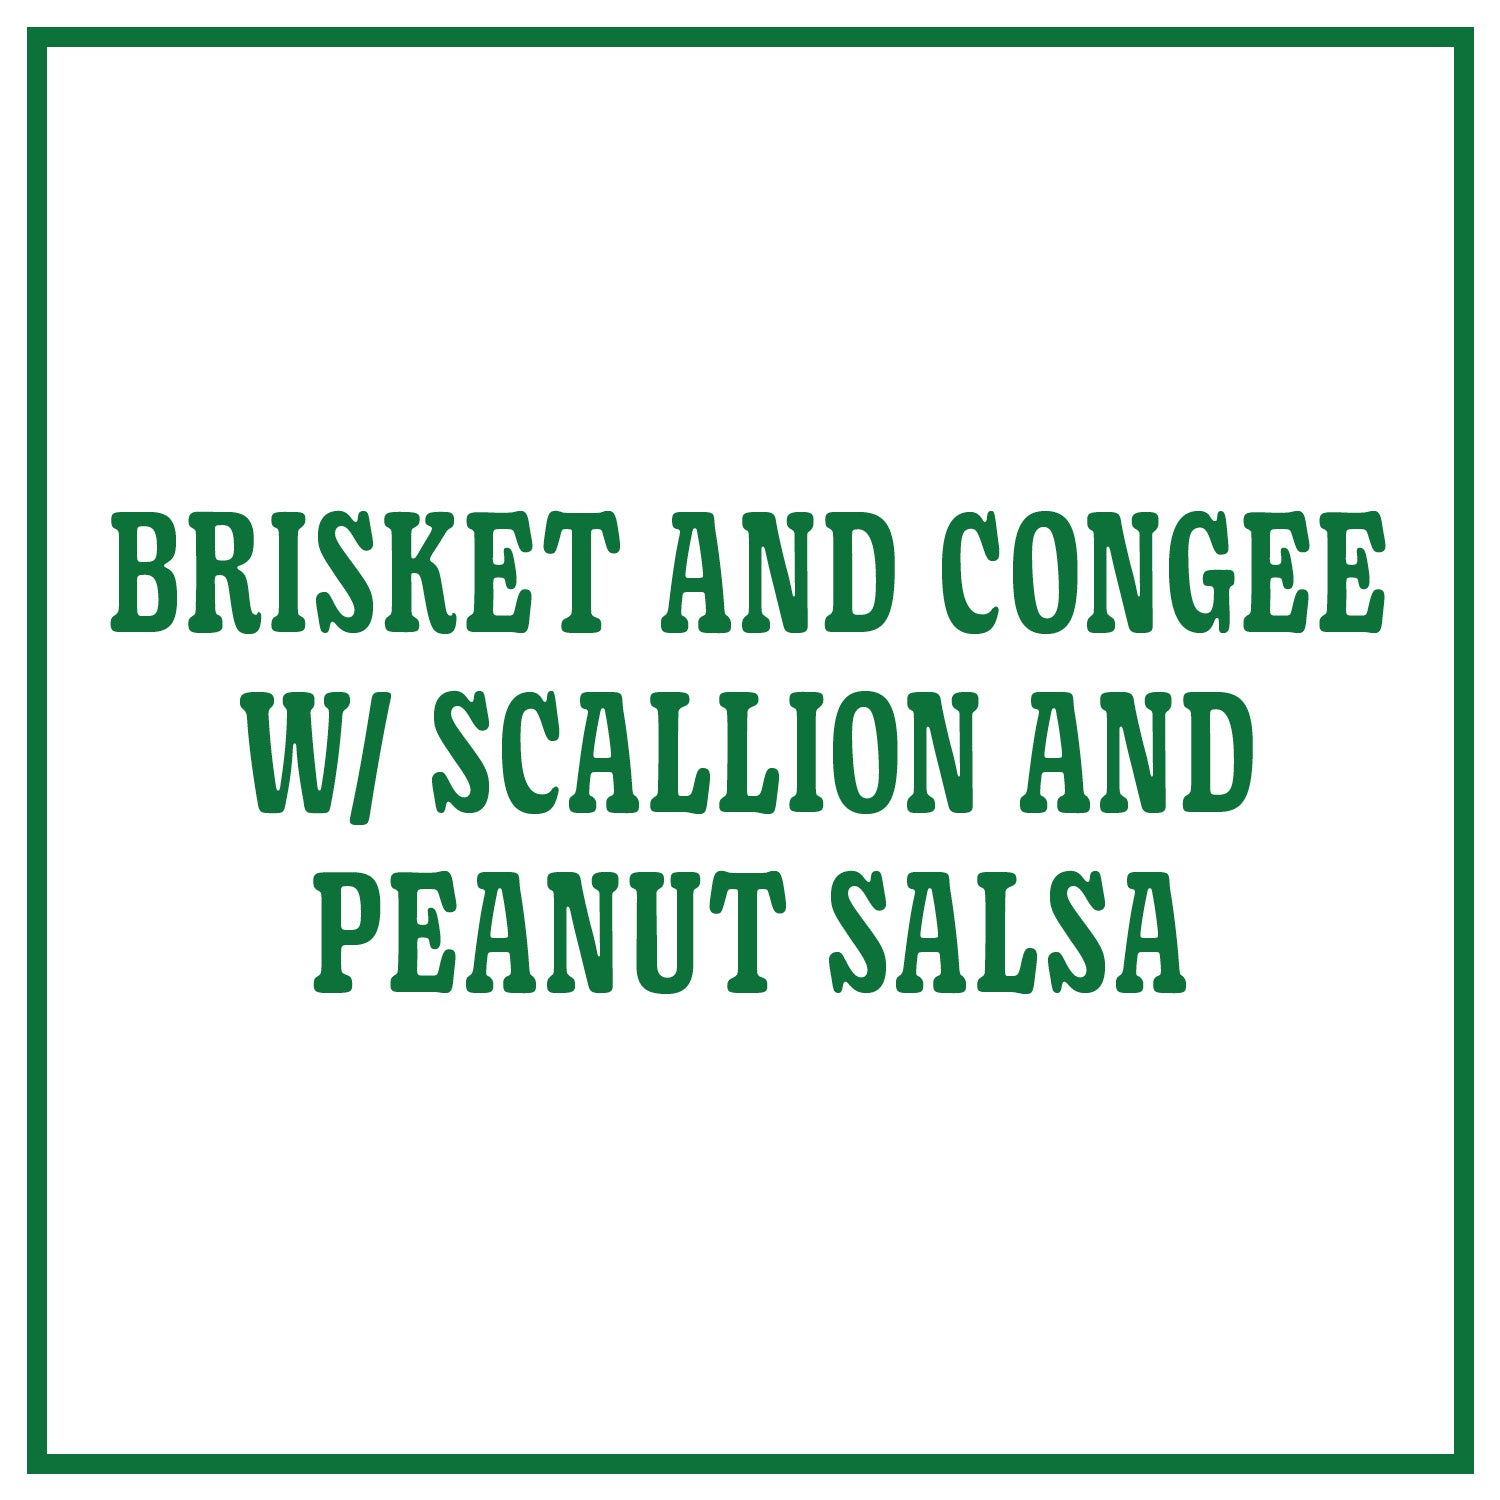 Brisket and Congee with Scallion and Peanut Salsa